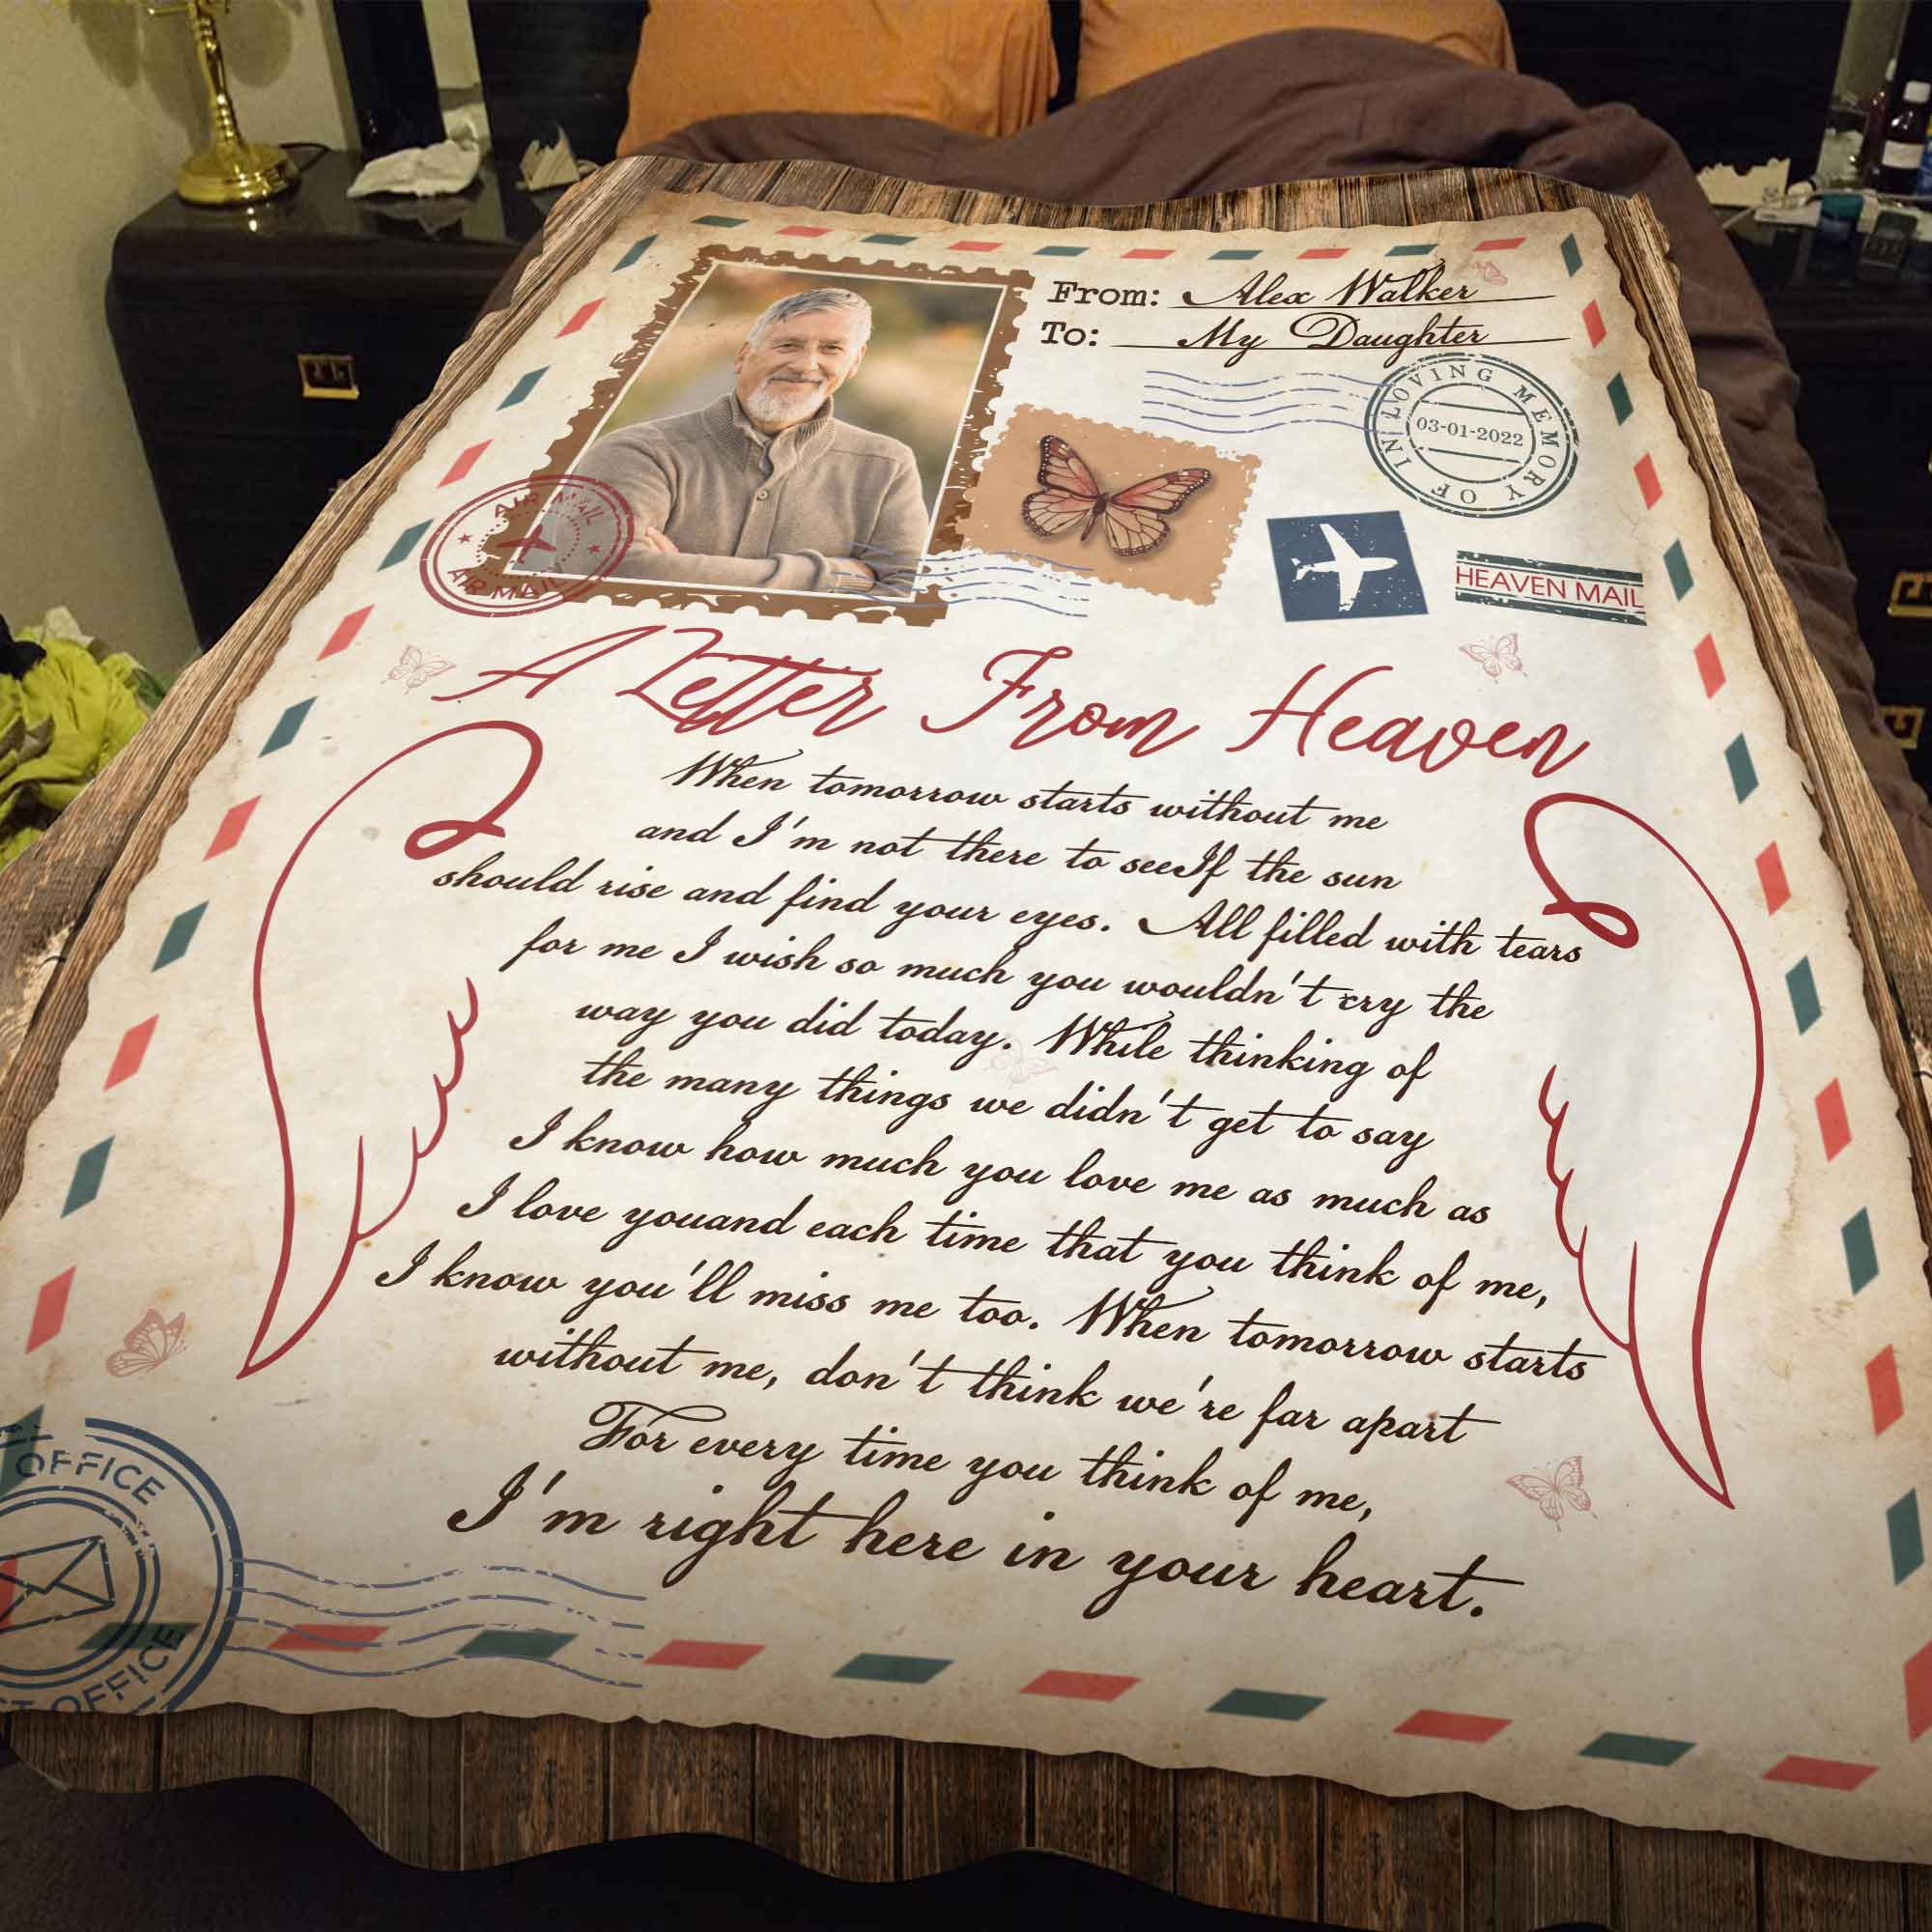 Personalized In Memory Blanket For Loss Of Father, Letter From Heaven, Funeral Throws Memorial Blankets For Dad, Personalized Photo Blanket, Condolence Blanket